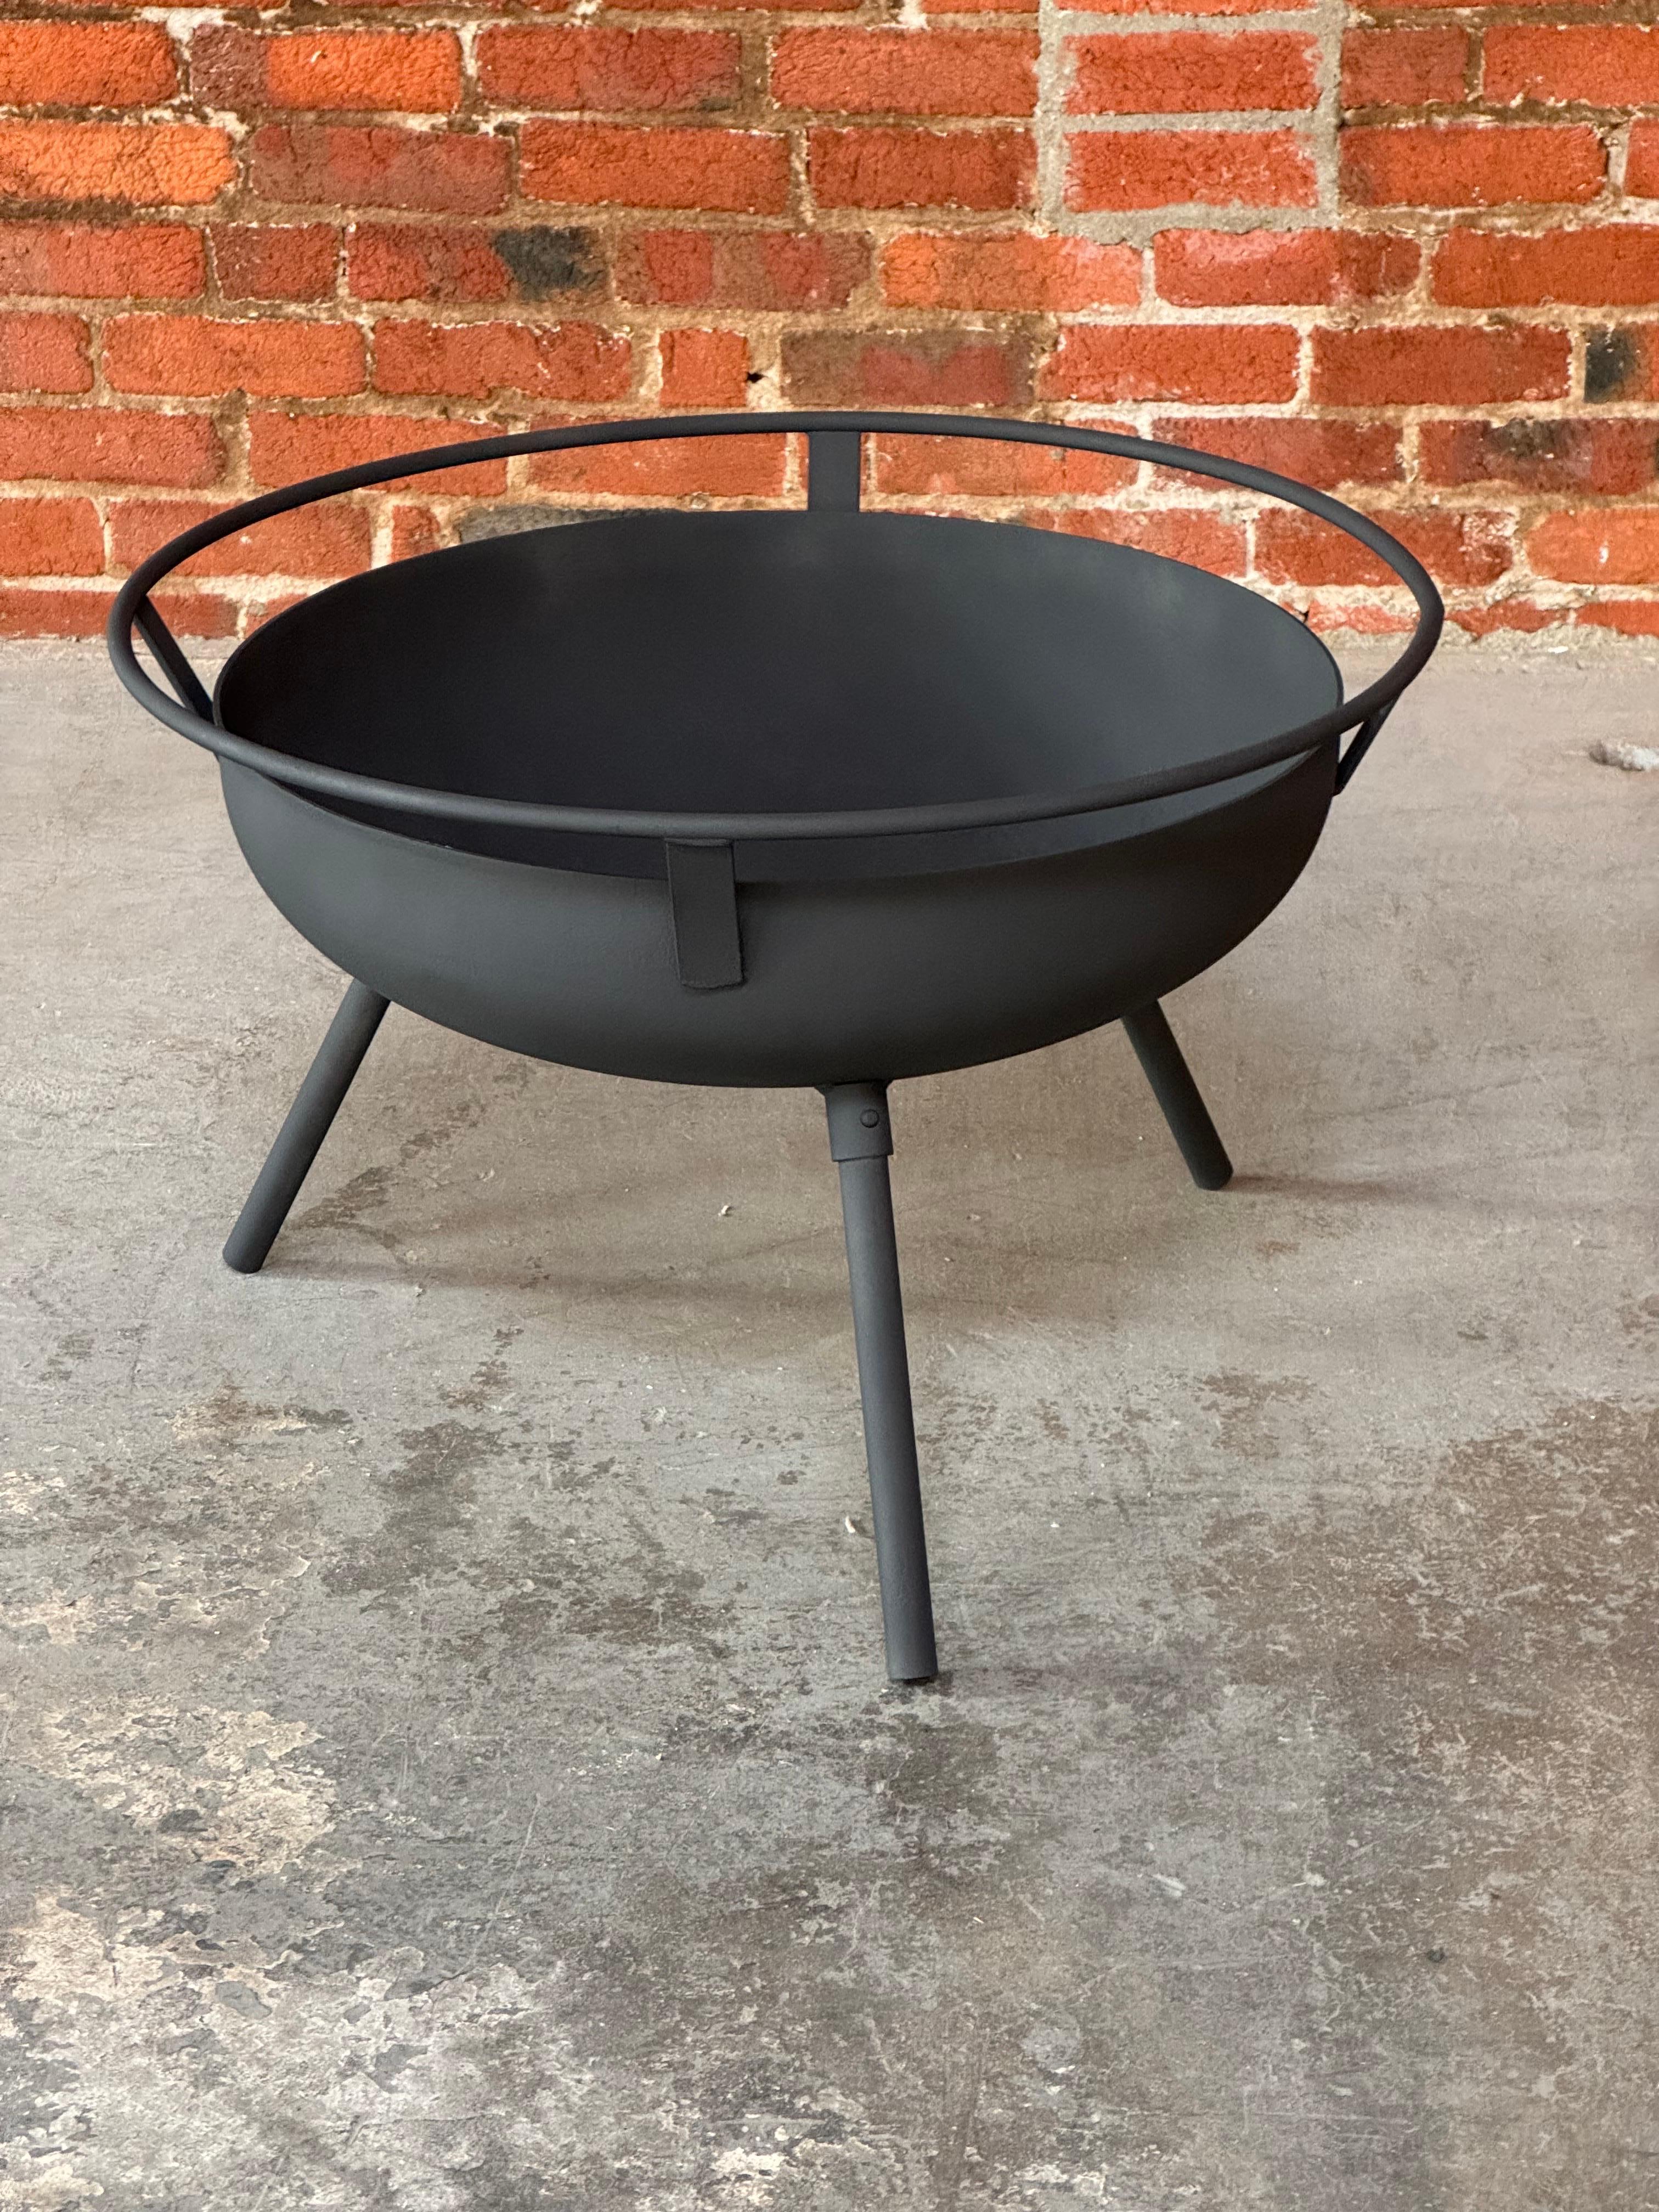 Modernist design circa 1950s three legged iron fire pit. Consisting of a thick iron bowl with a welded iron ring intended as a handle attached to the outside rim of the fire pit and is supported by three detachable tubular iron legs. The fire pit